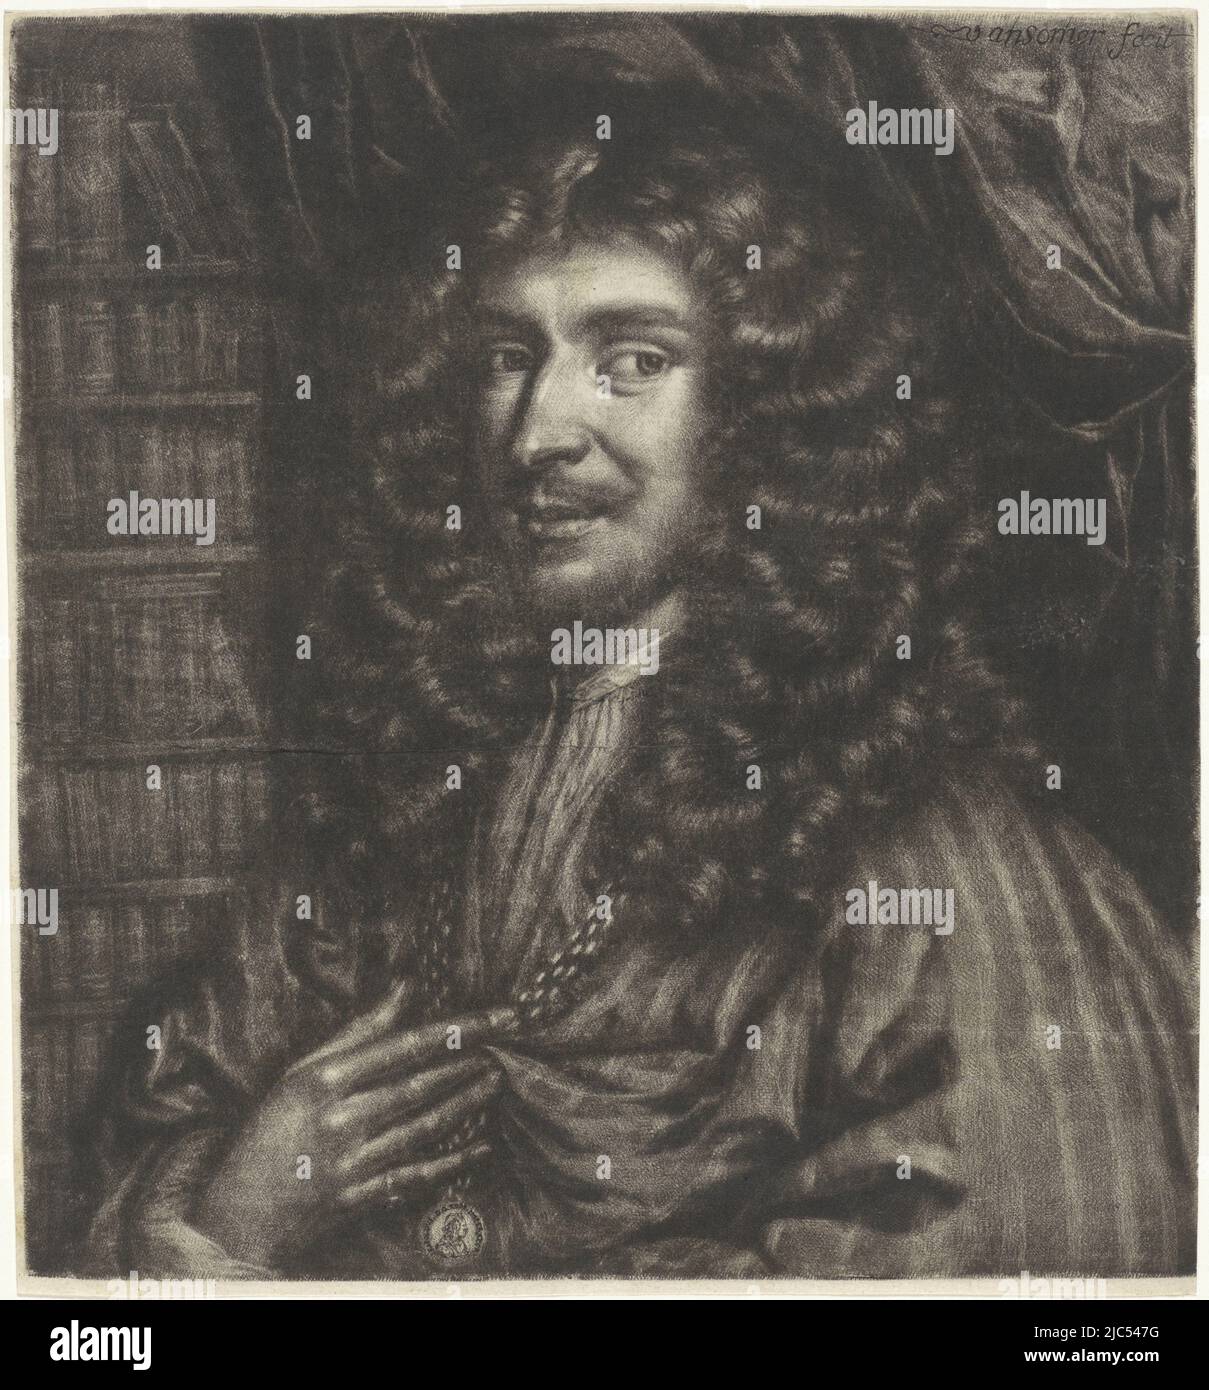 The French physician Charles Patin in front of a bookcase. Around his neck a chain from which a medallion with a portrait in profile., Portrait of Charles Patin, print maker: Jan van Somer, 1655 - 1700, paper, h 261 mm × w 243 mm Stock Photo